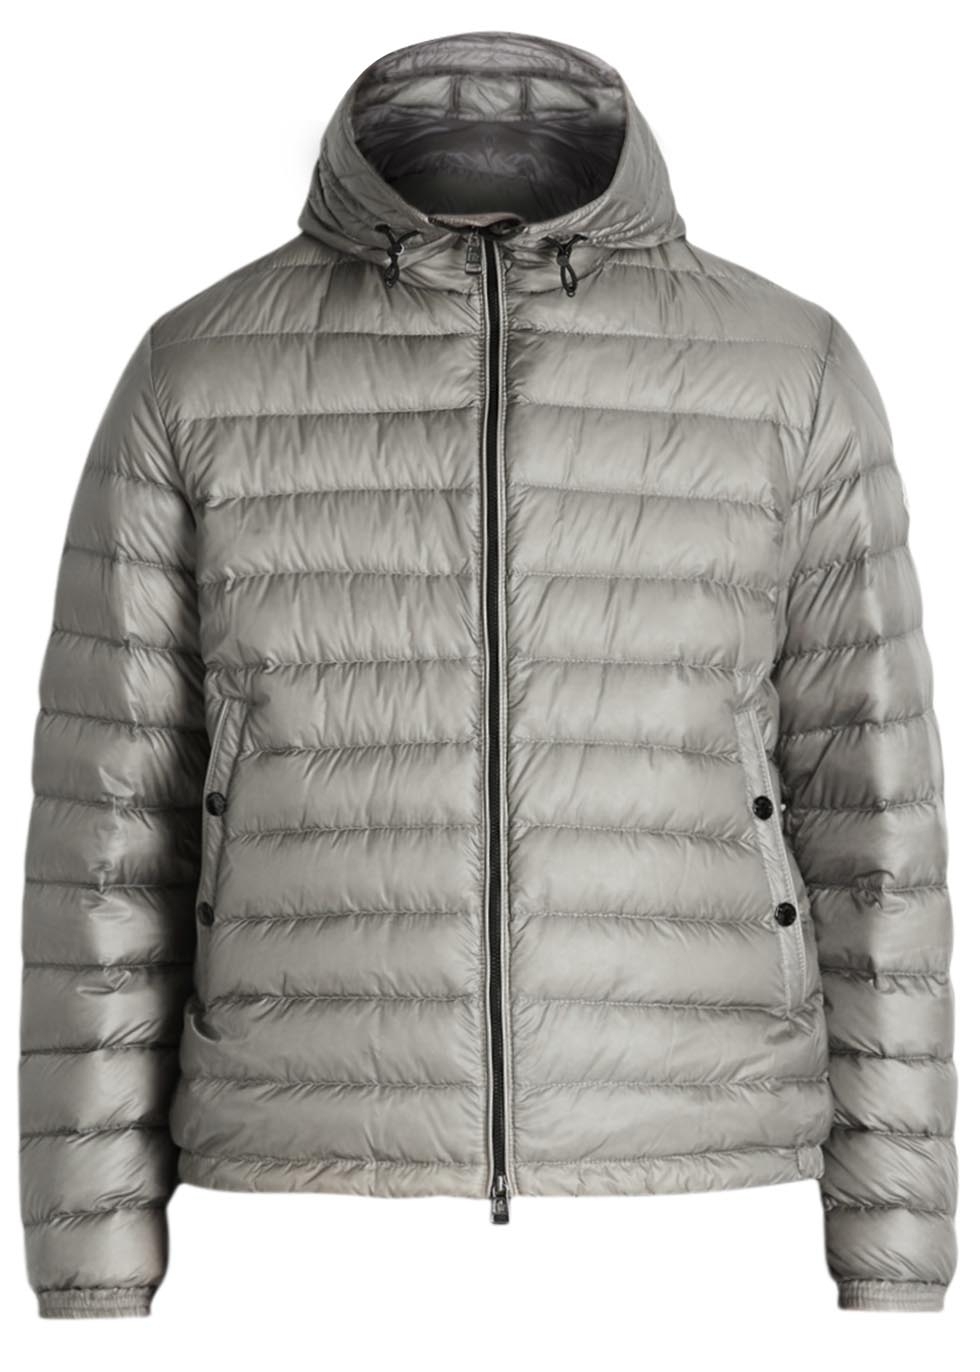 Dijon grey quilted shell jacket